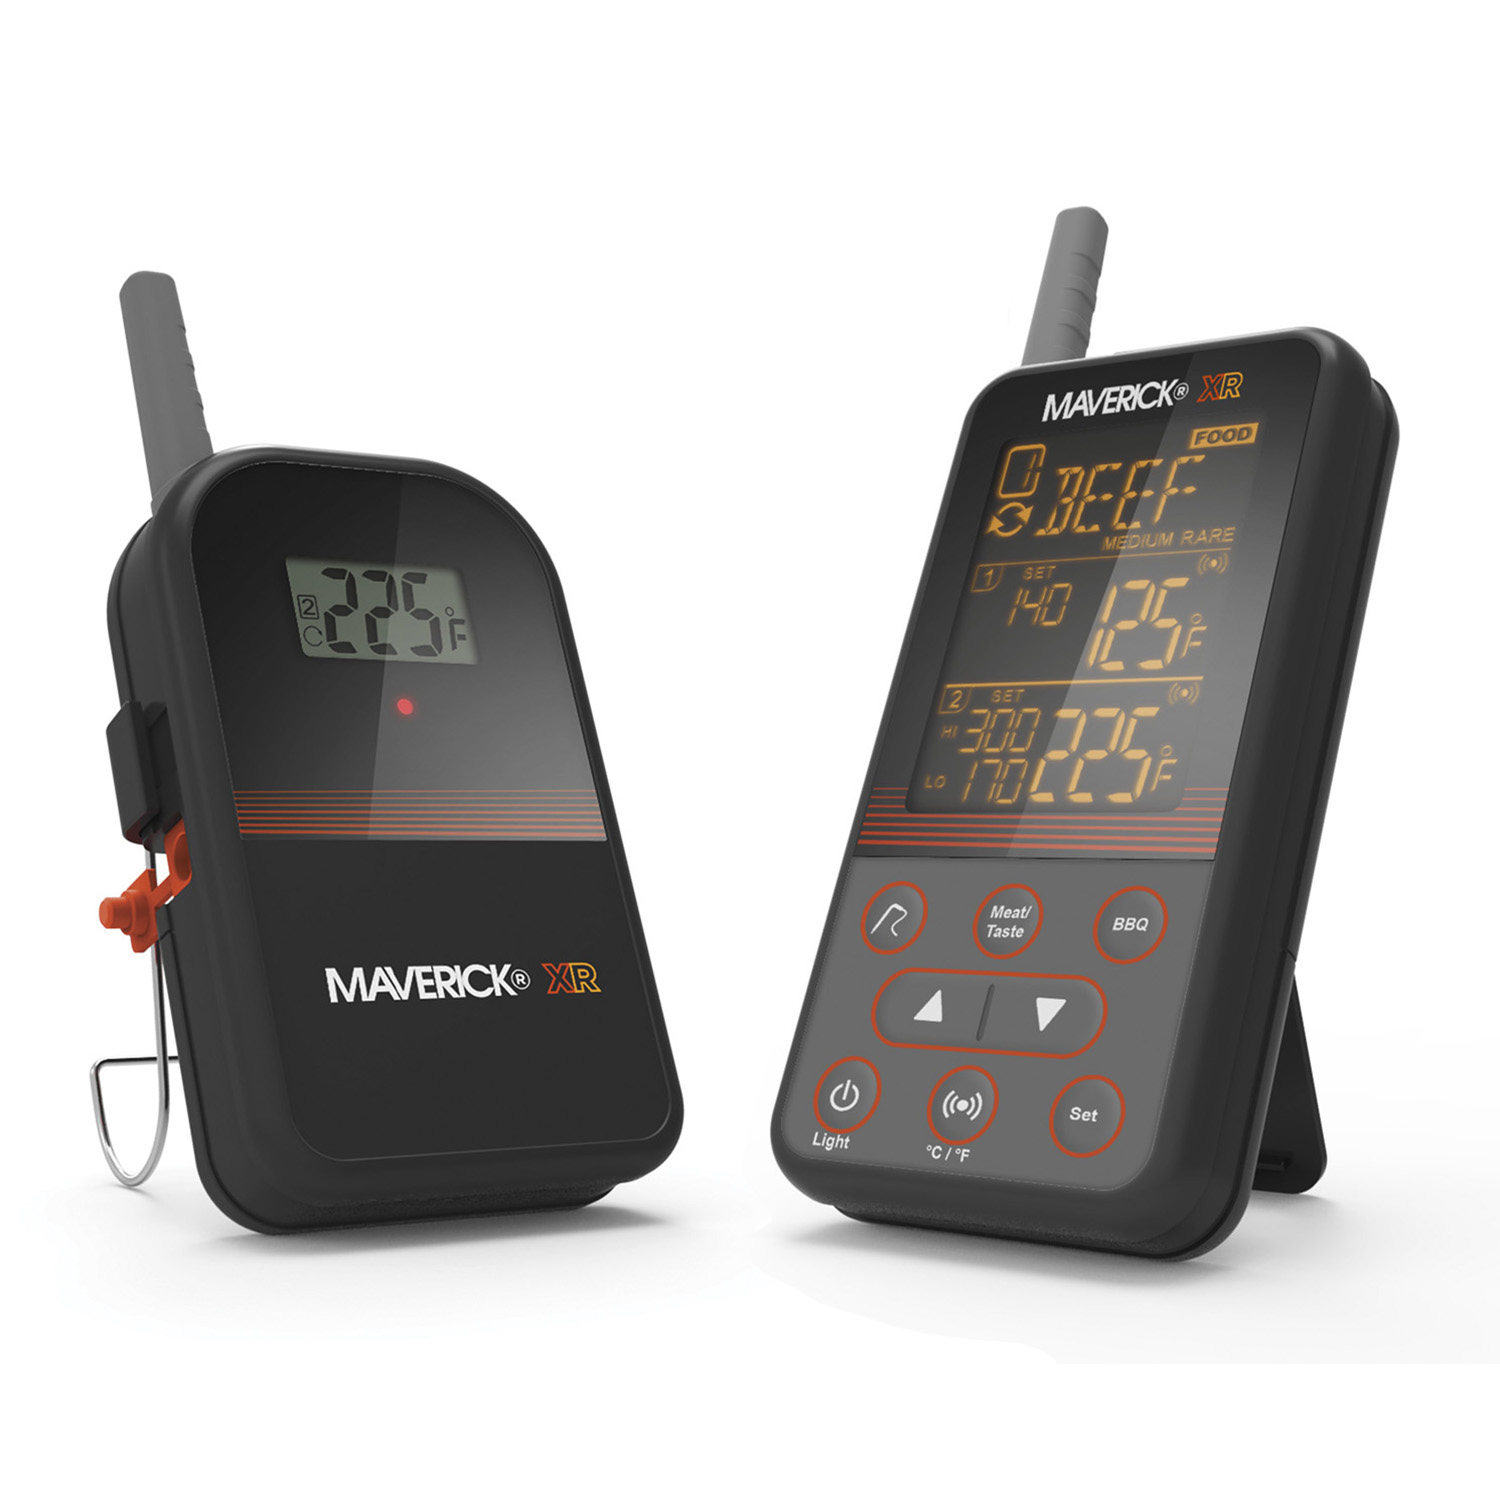 XR-40 Extended Range Probe Digital BBQ and Meat Thermometer